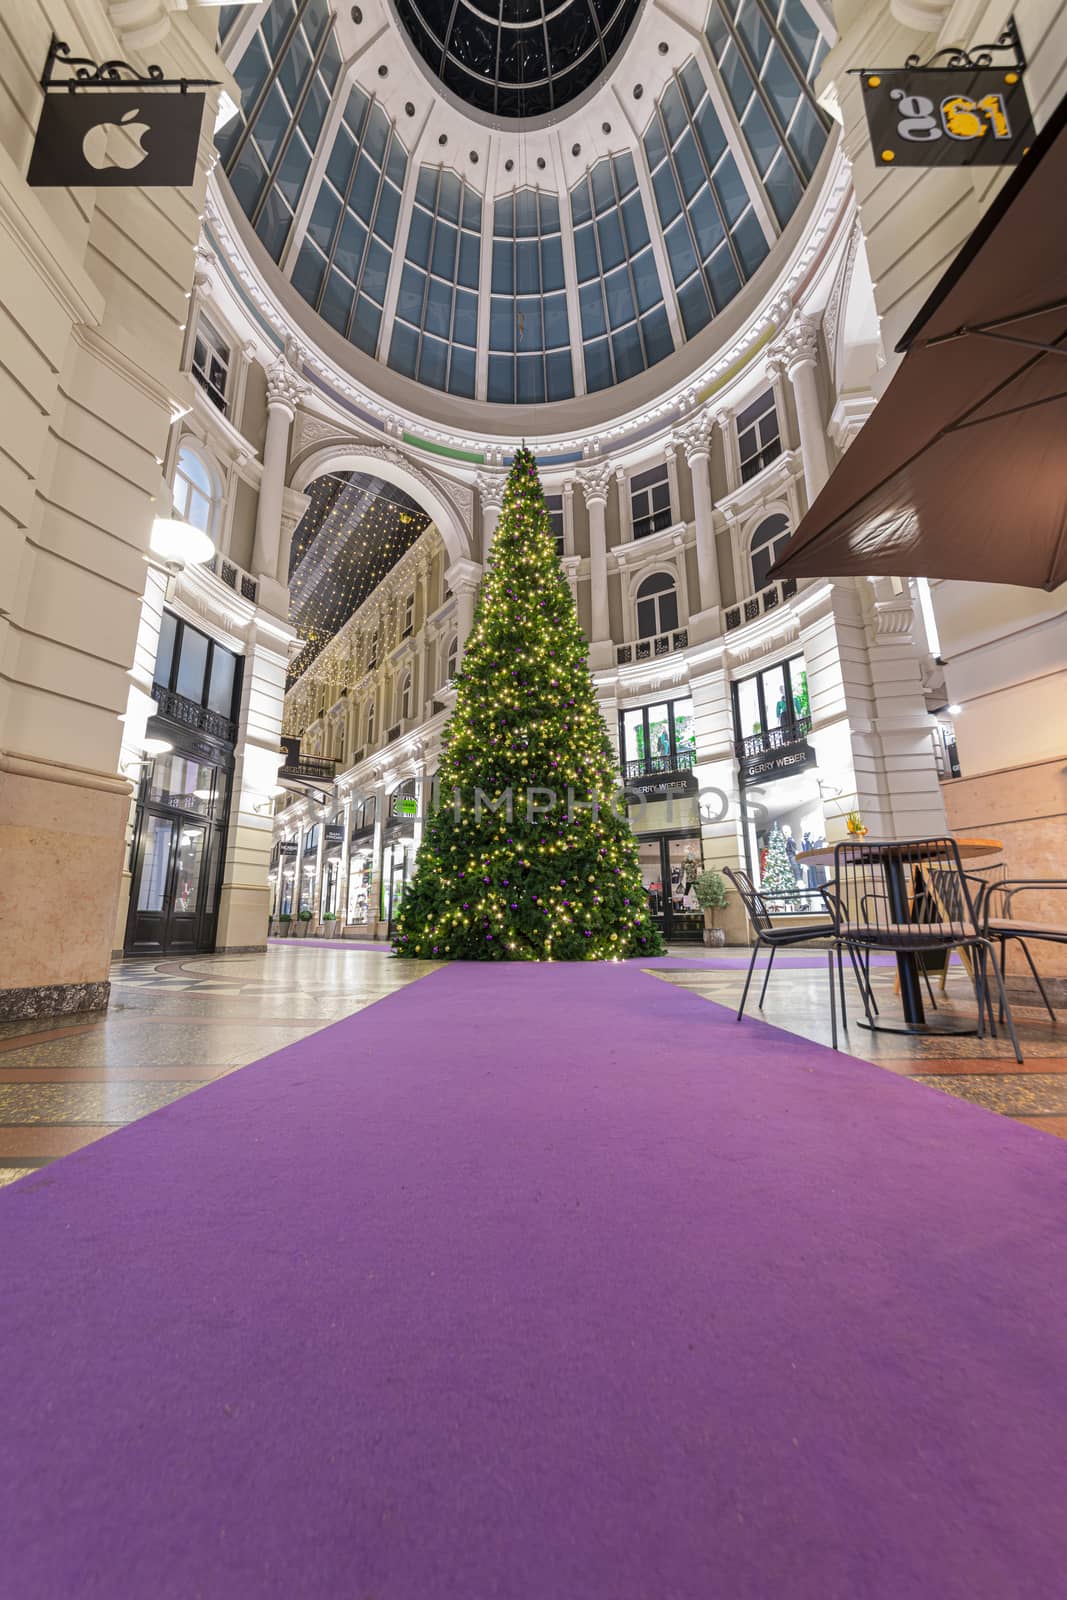 THE HAGUE, 30 December 2019 - Christmas tree in De Passage shopping mall at night after a crowded and busy shopping time, Netherlands
